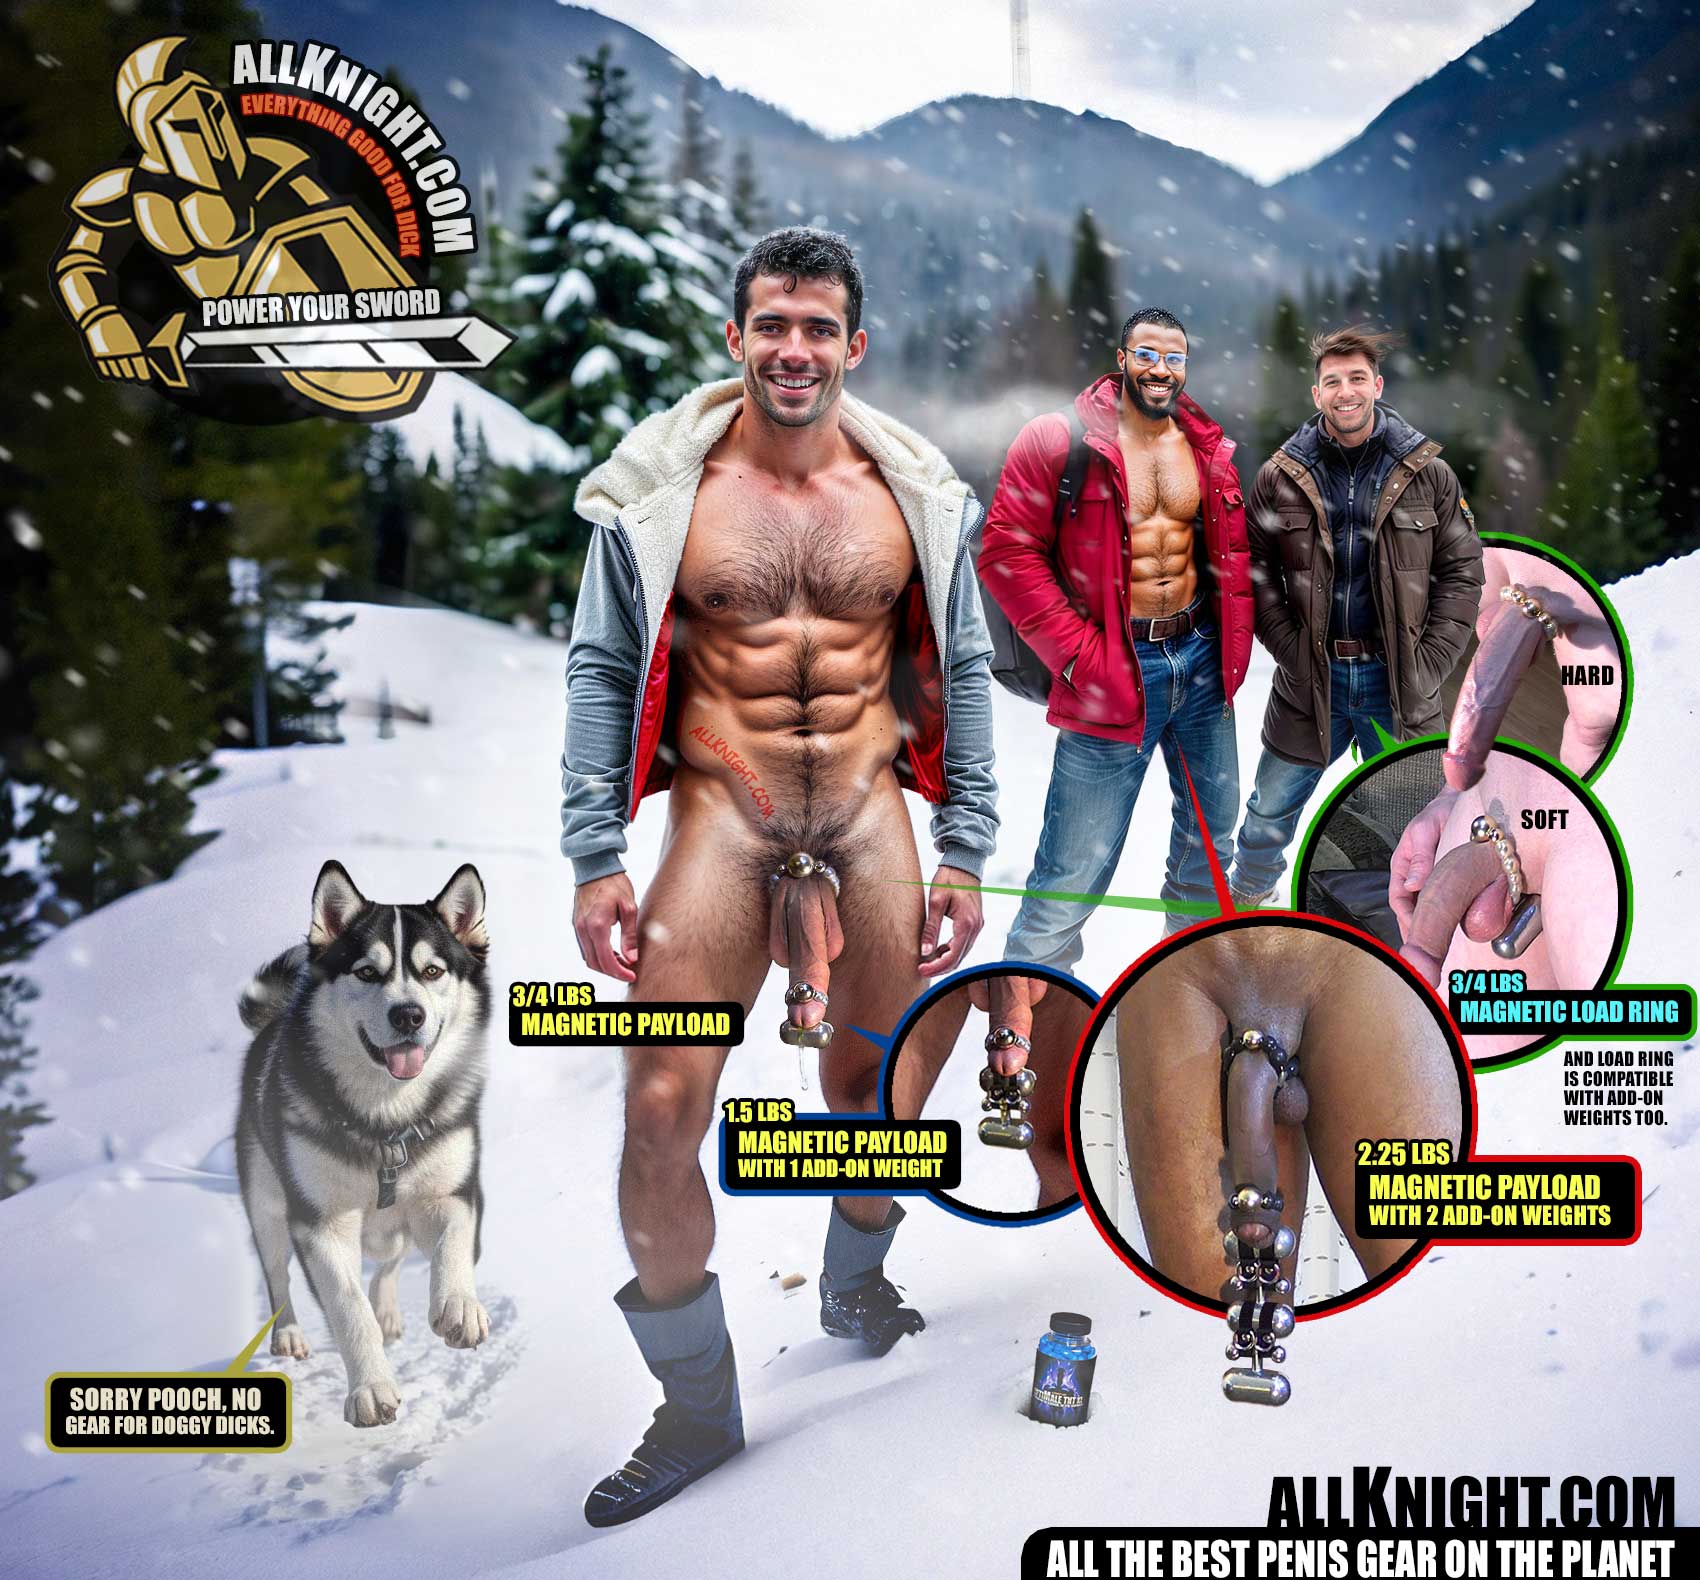 Adventure often finds us when we aren’t looking, and you just need to be ready. Sometimes a boy’s gotta strip and let his big cock swing, even nude in the snow. When it comes to keeping your junk powerful and growing there’s nothing better than HARDWEAR penis gear.